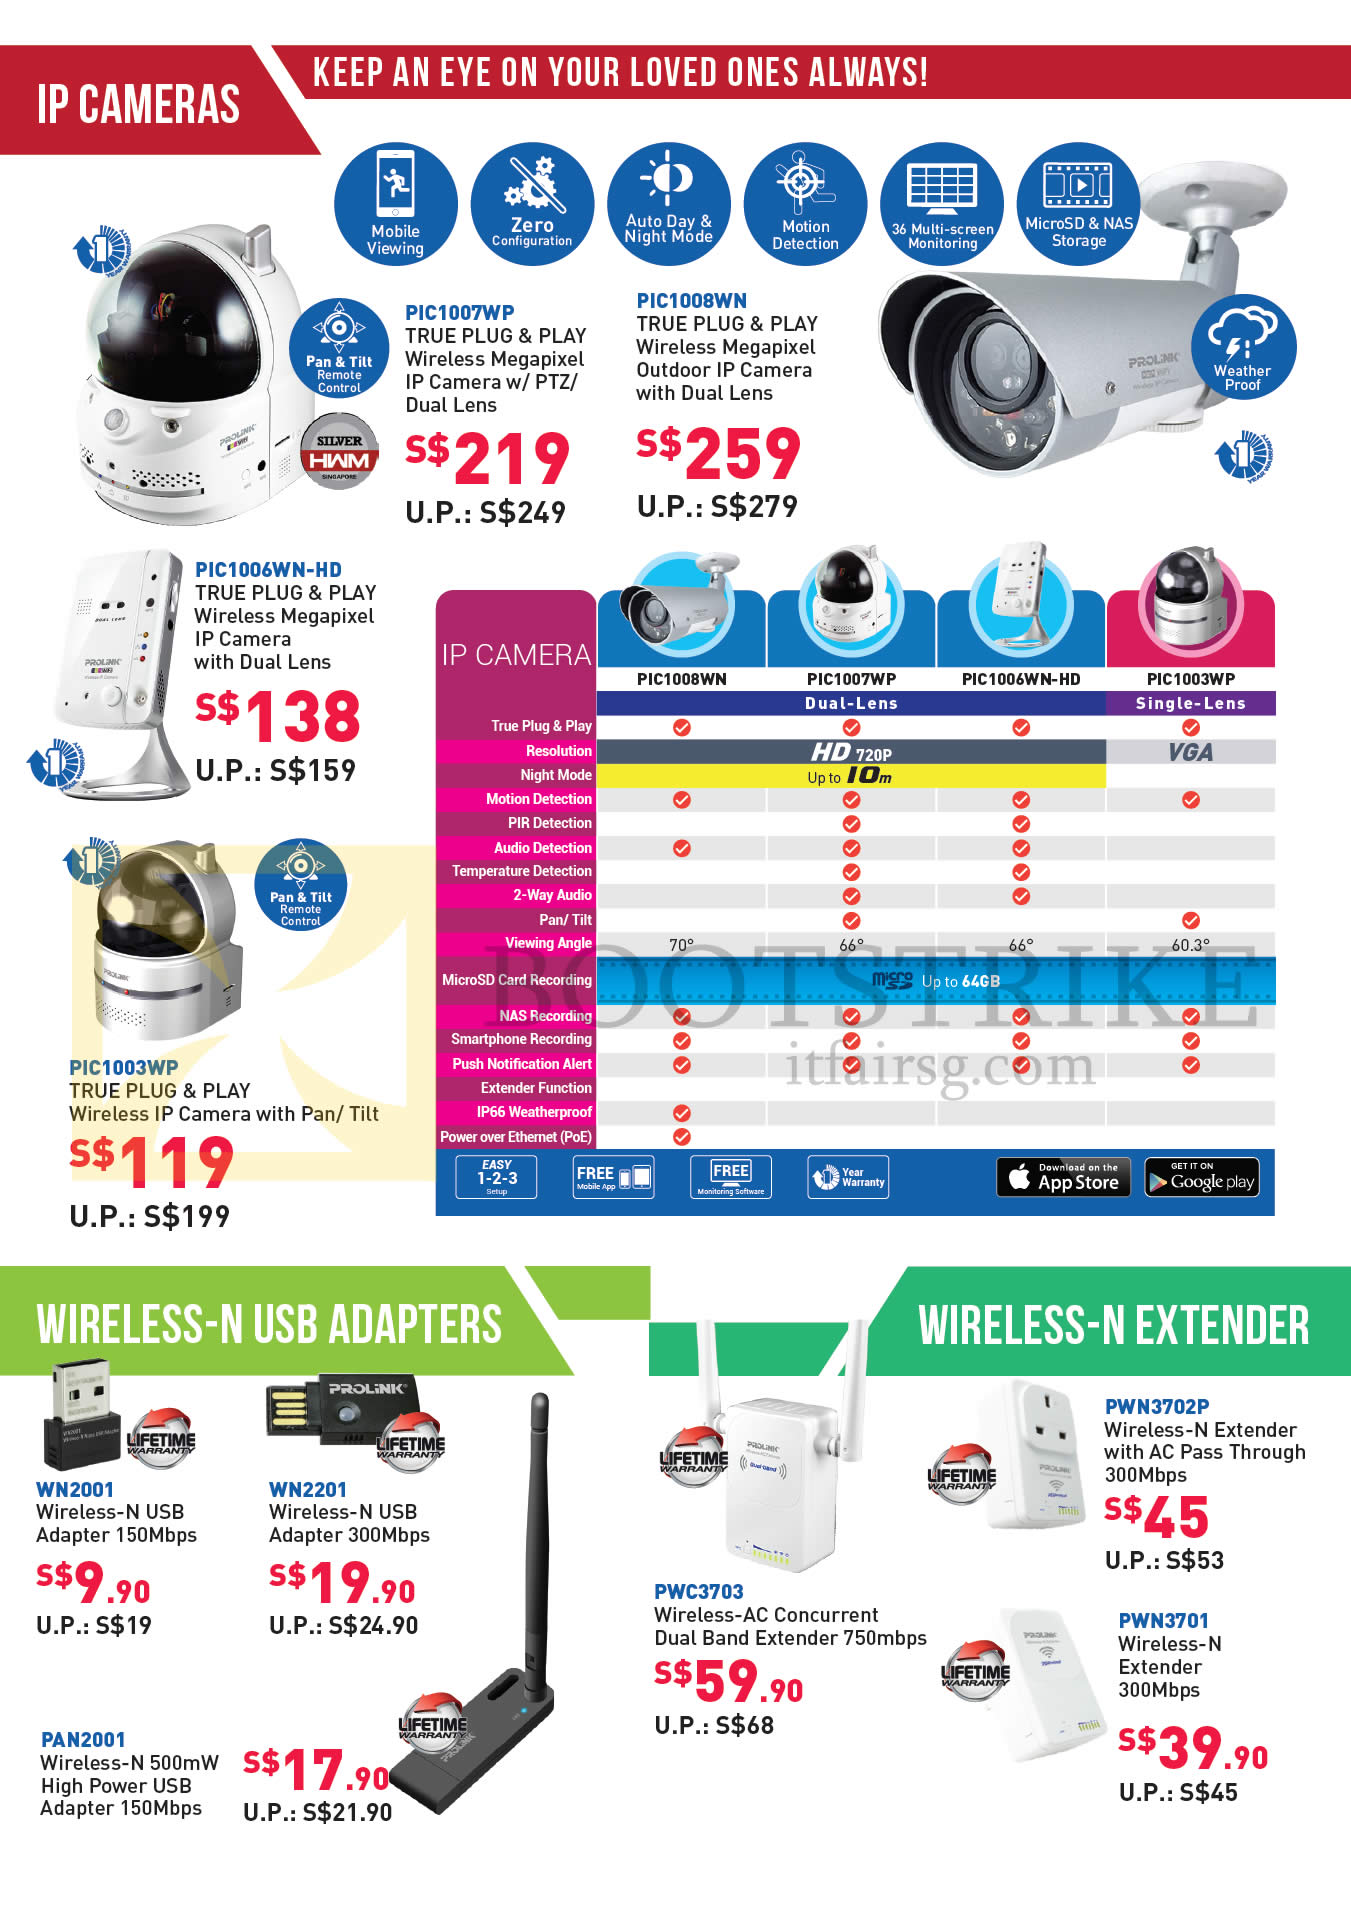 COMEX 2016 price list image brochure of Prolink IP Cameras, Wireless N USB Adapters, Wireless N Extender, PIC1007WP, 1008WN, 1006WN-HD, 1003WP, WN2001, 2201, PAN2001, PWC3703, 3702P, 3701